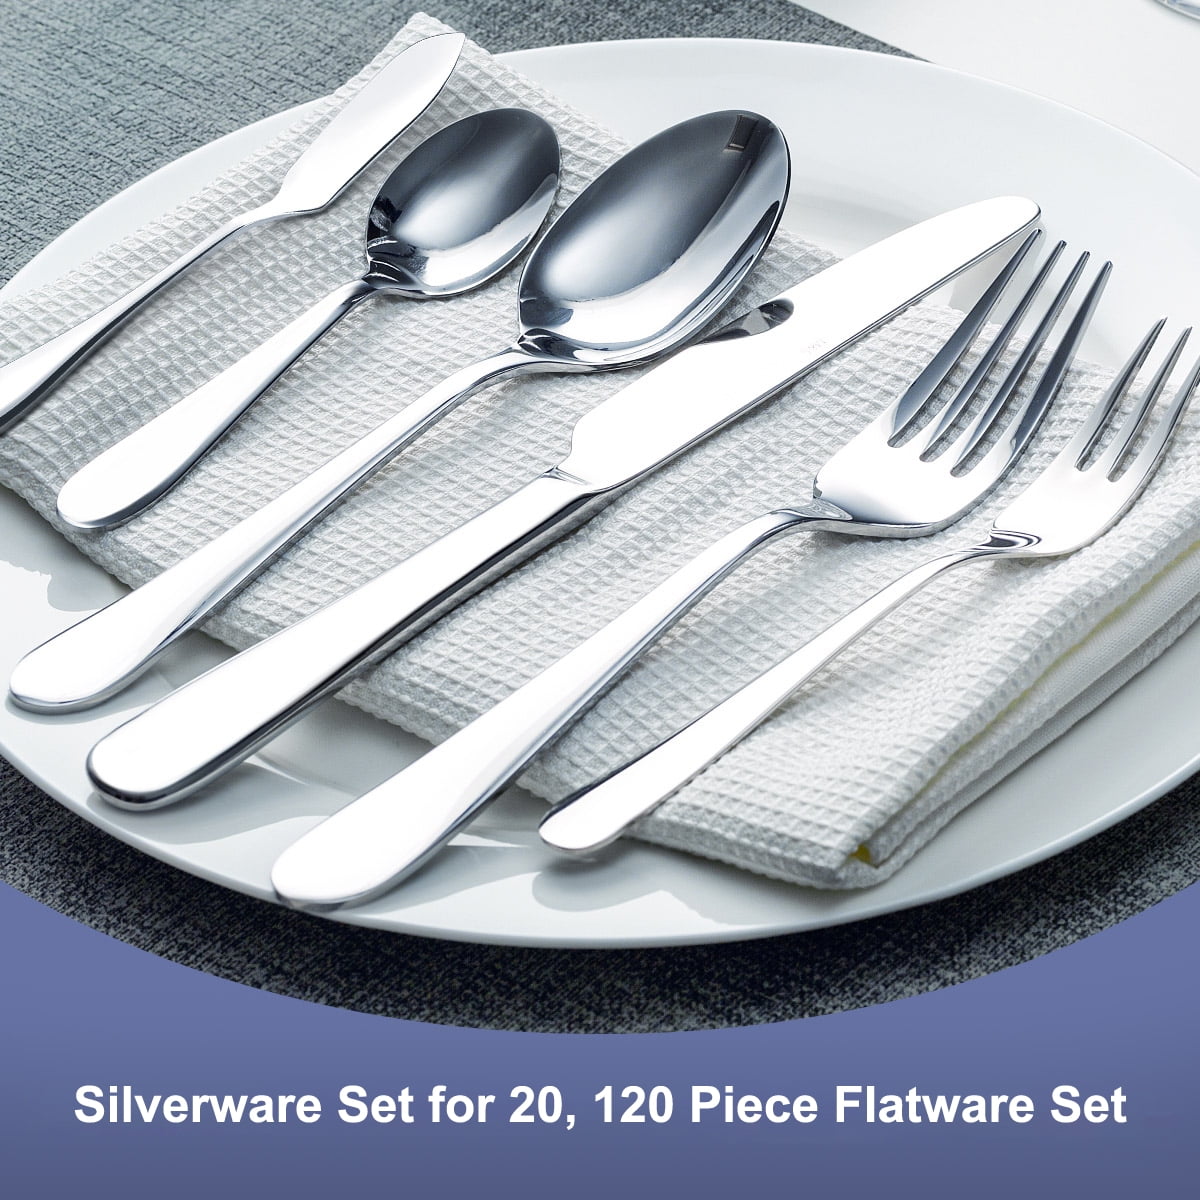 120 Piece Flatware Set for Wedding or Restaurant, Silverware Set for 20  People, Stainless Steel Flatware Sets, Mirror Polished Cutlery Utensil Set